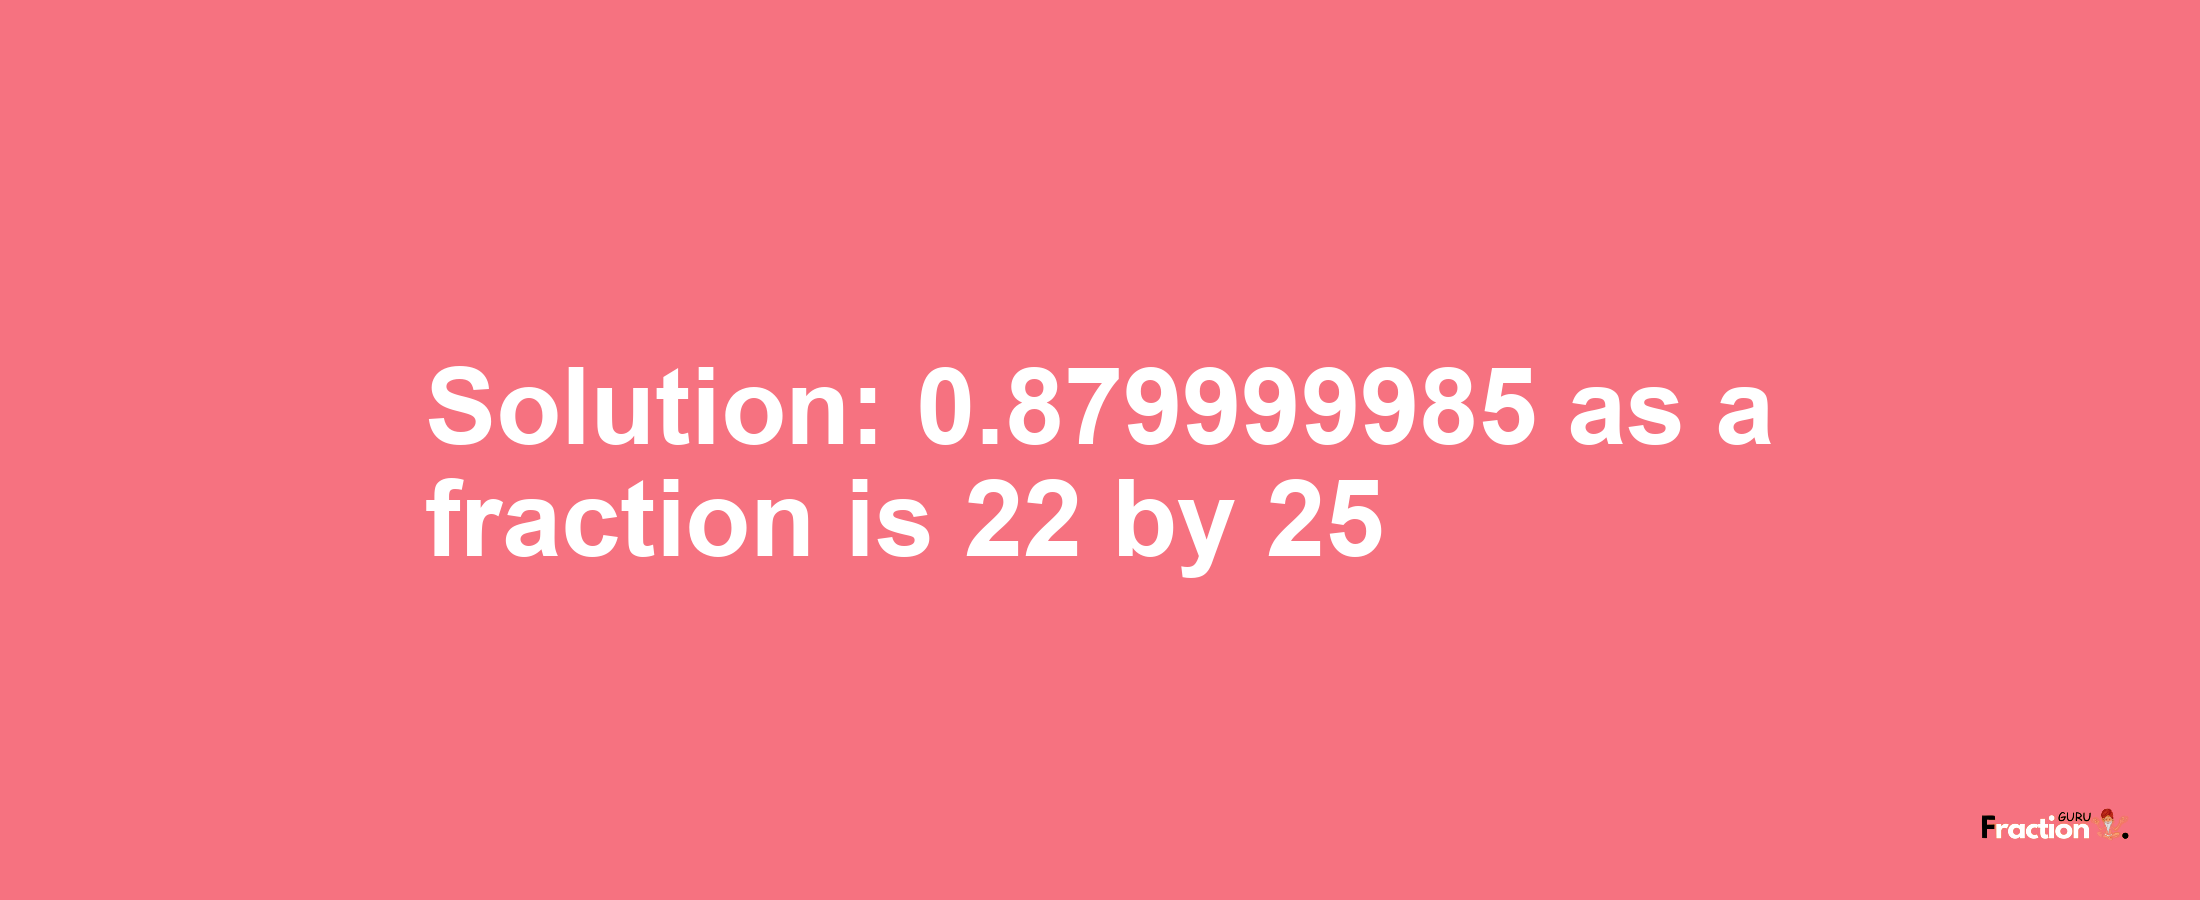 Solution:0.879999985 as a fraction is 22/25